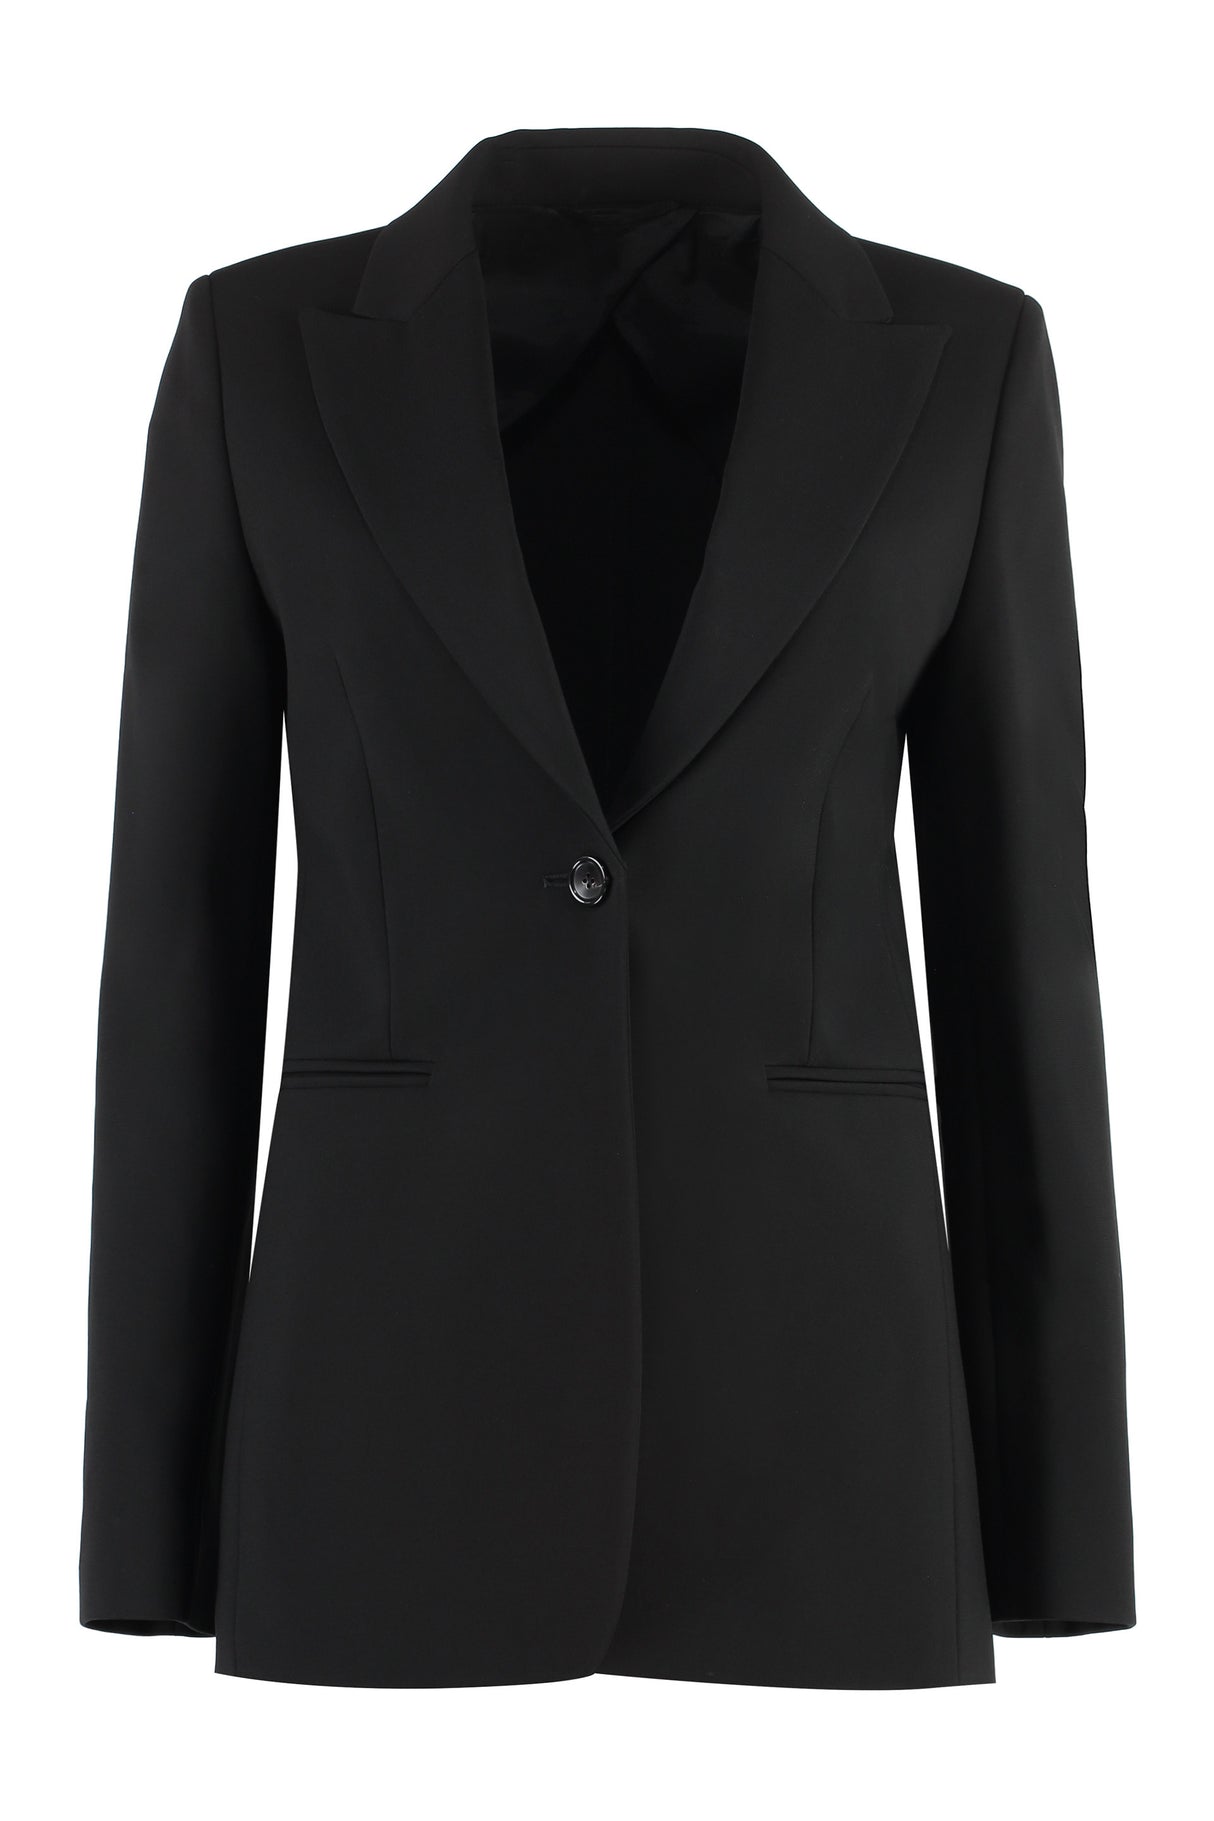 Bold and Chic Black Single-Breasted Jacket for Women - FW23